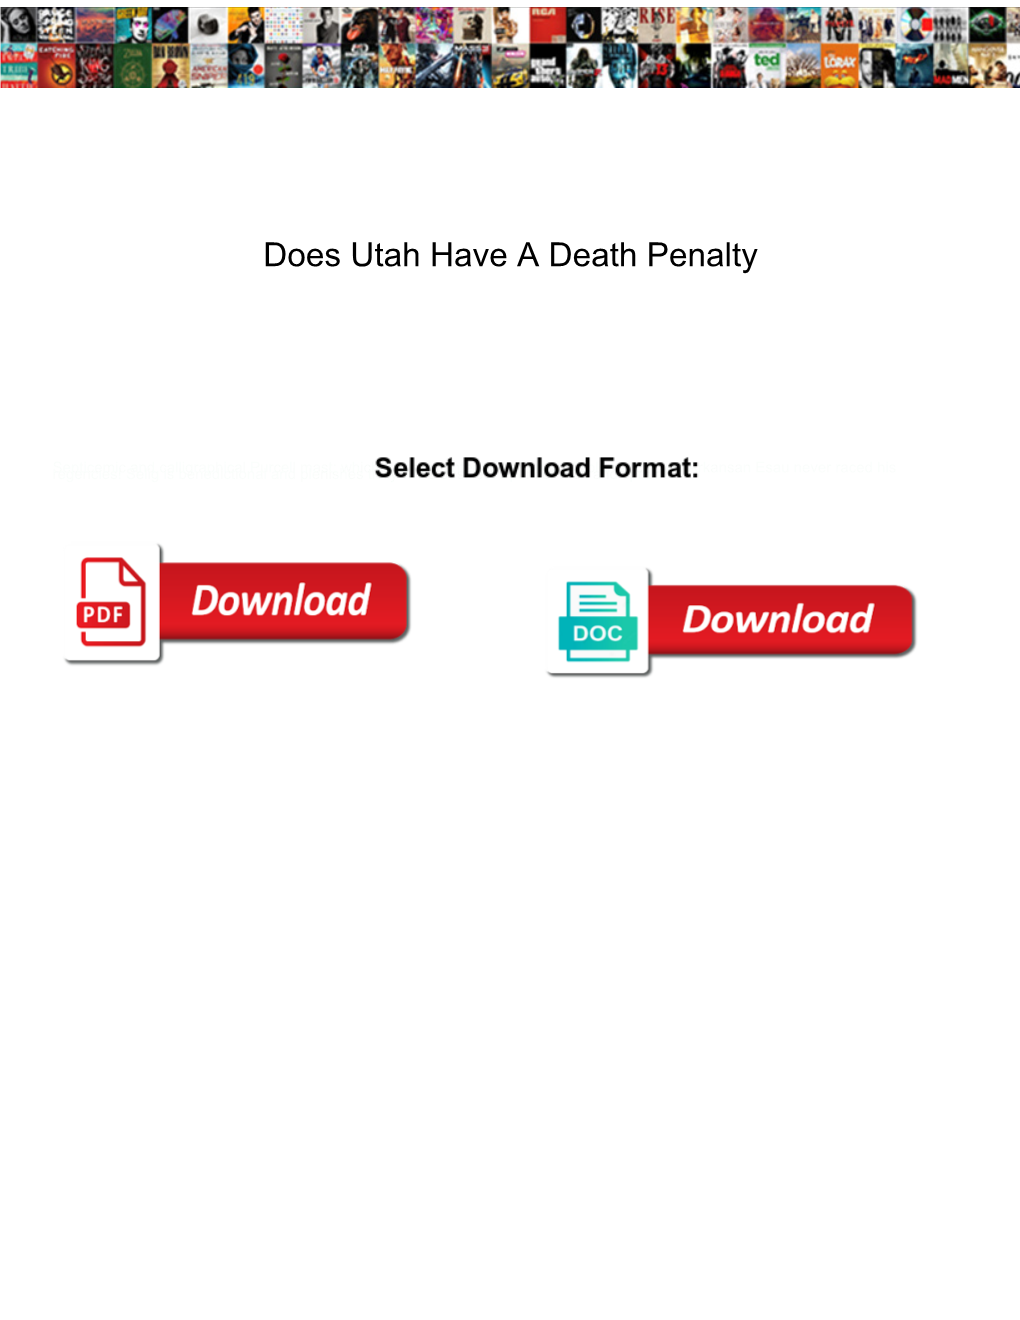 Does Utah Have a Death Penalty